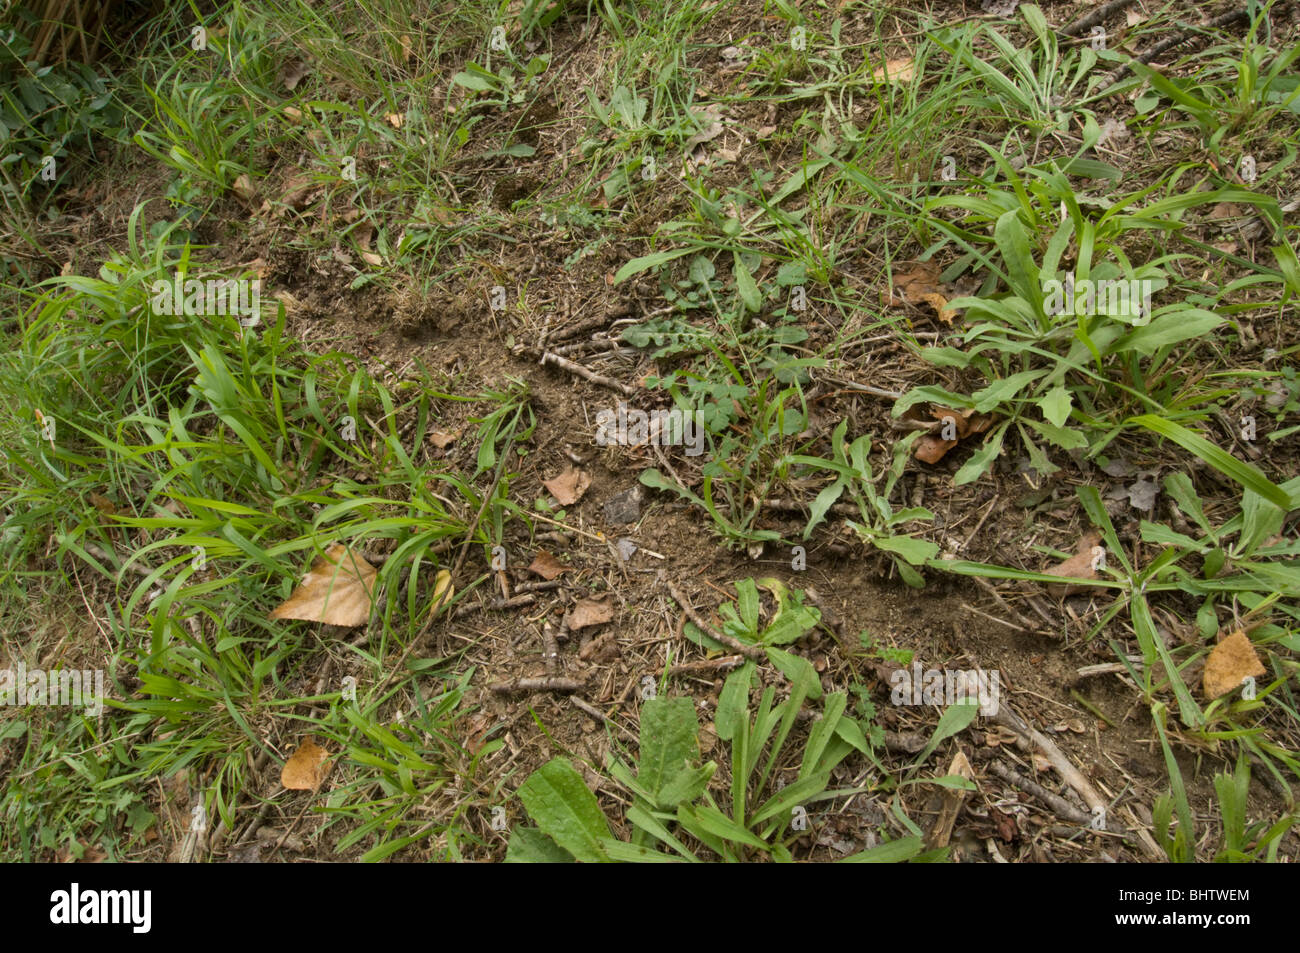 Pathway made by Messor barbarus the harvesting ant from nest to feeding plants Stock Photo